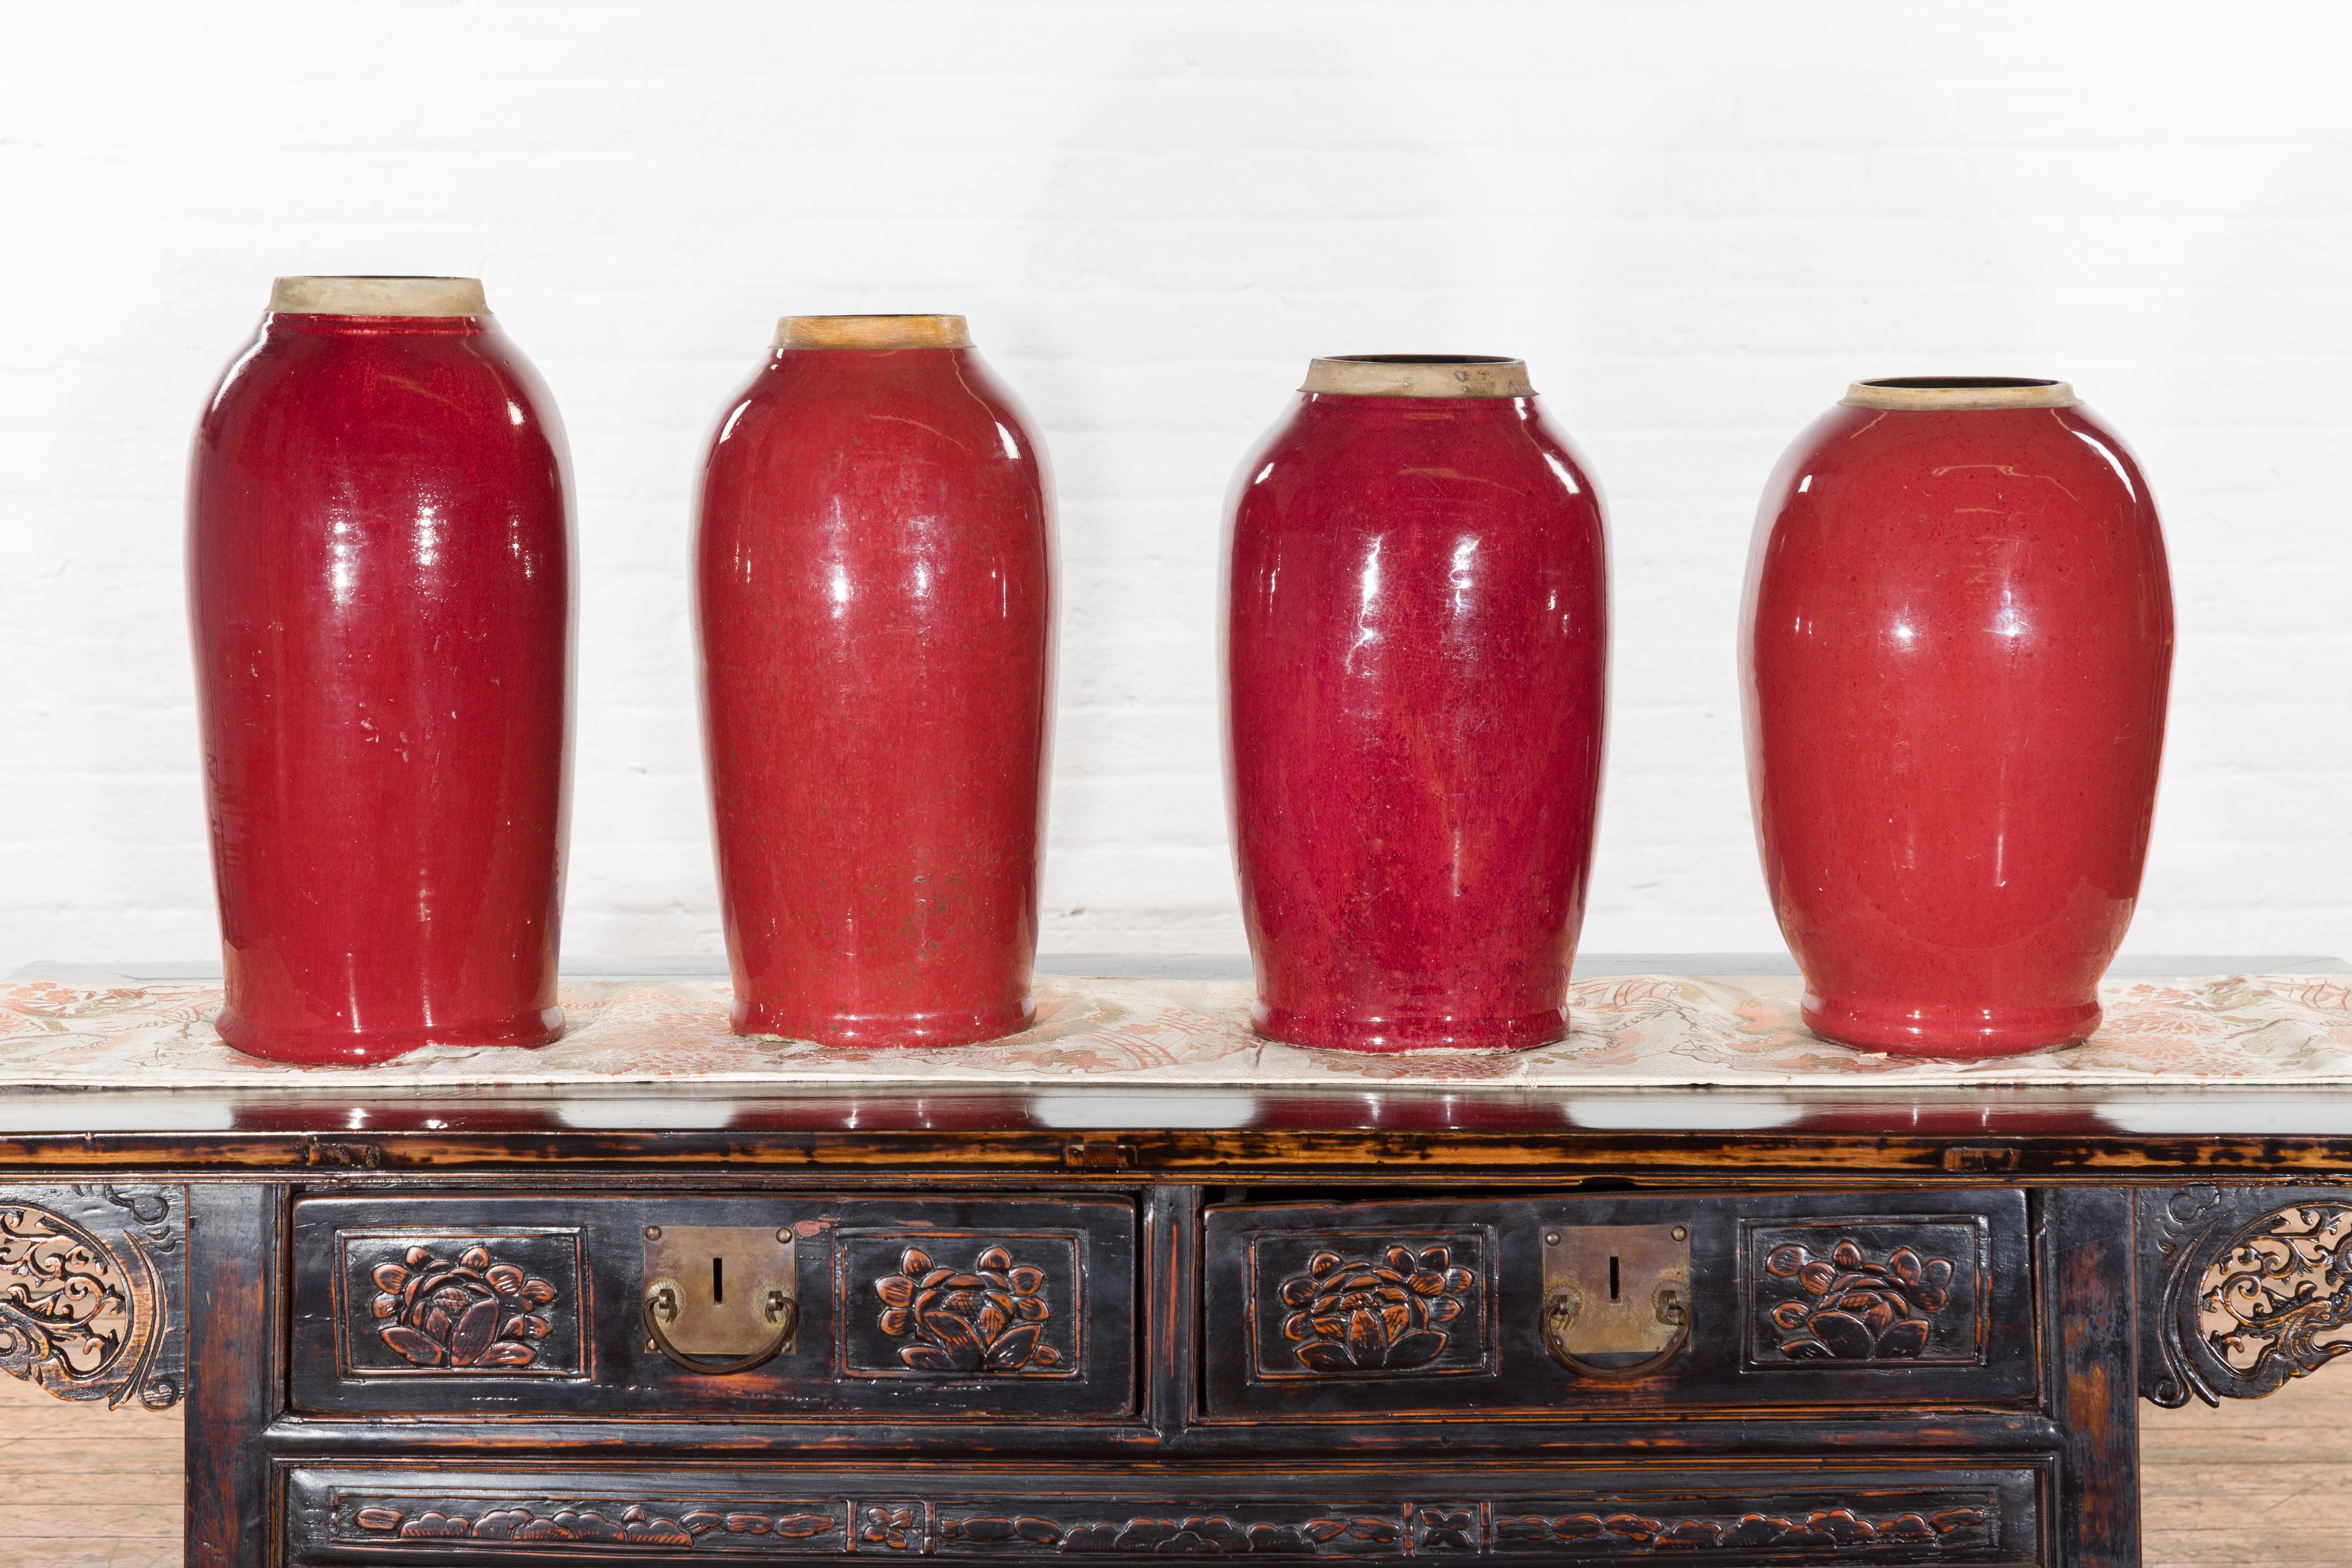 Our vintage oxblood glazed colored altar vases from the mid 20th century make for striking additions to our vast collection of antique and vintage vases. All four vintage vases are from China and crafted with unglazed rimmed openings so that the